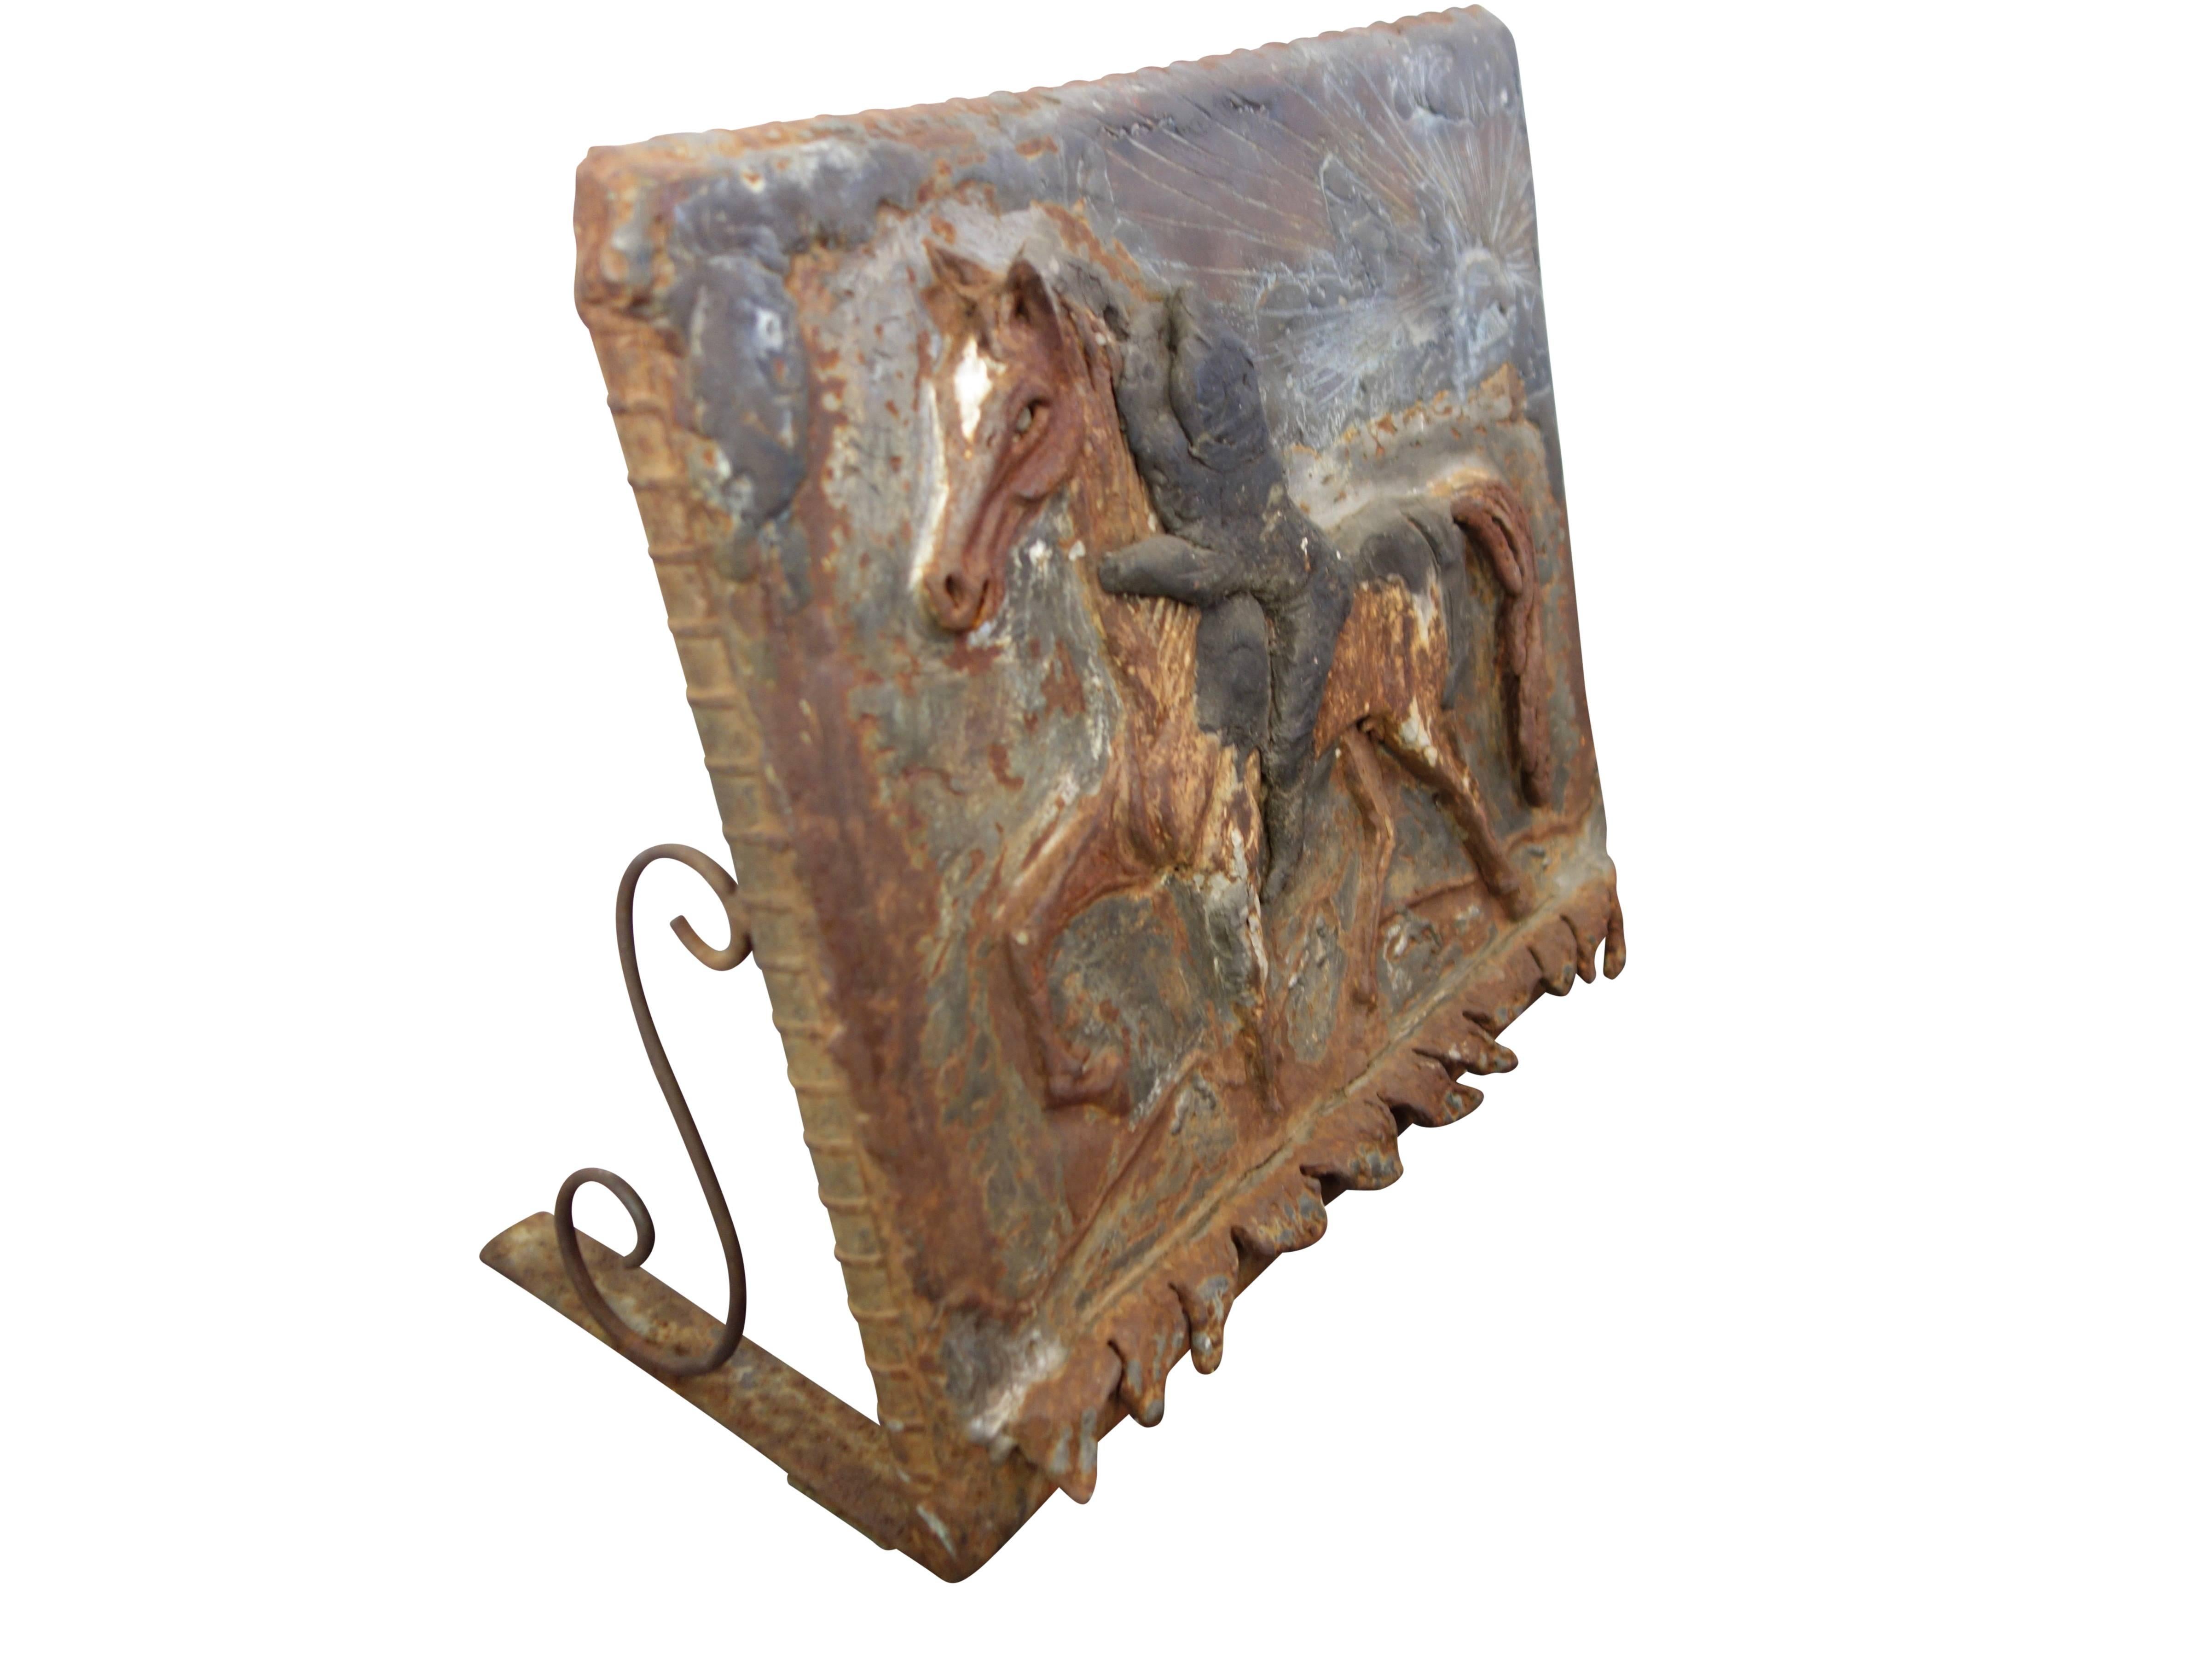 This is a one of a kind cast iron and copper plaque of a horse and rider. The sun and sky portion of the plaque is made of copper. Written on the back of the copper piece is 